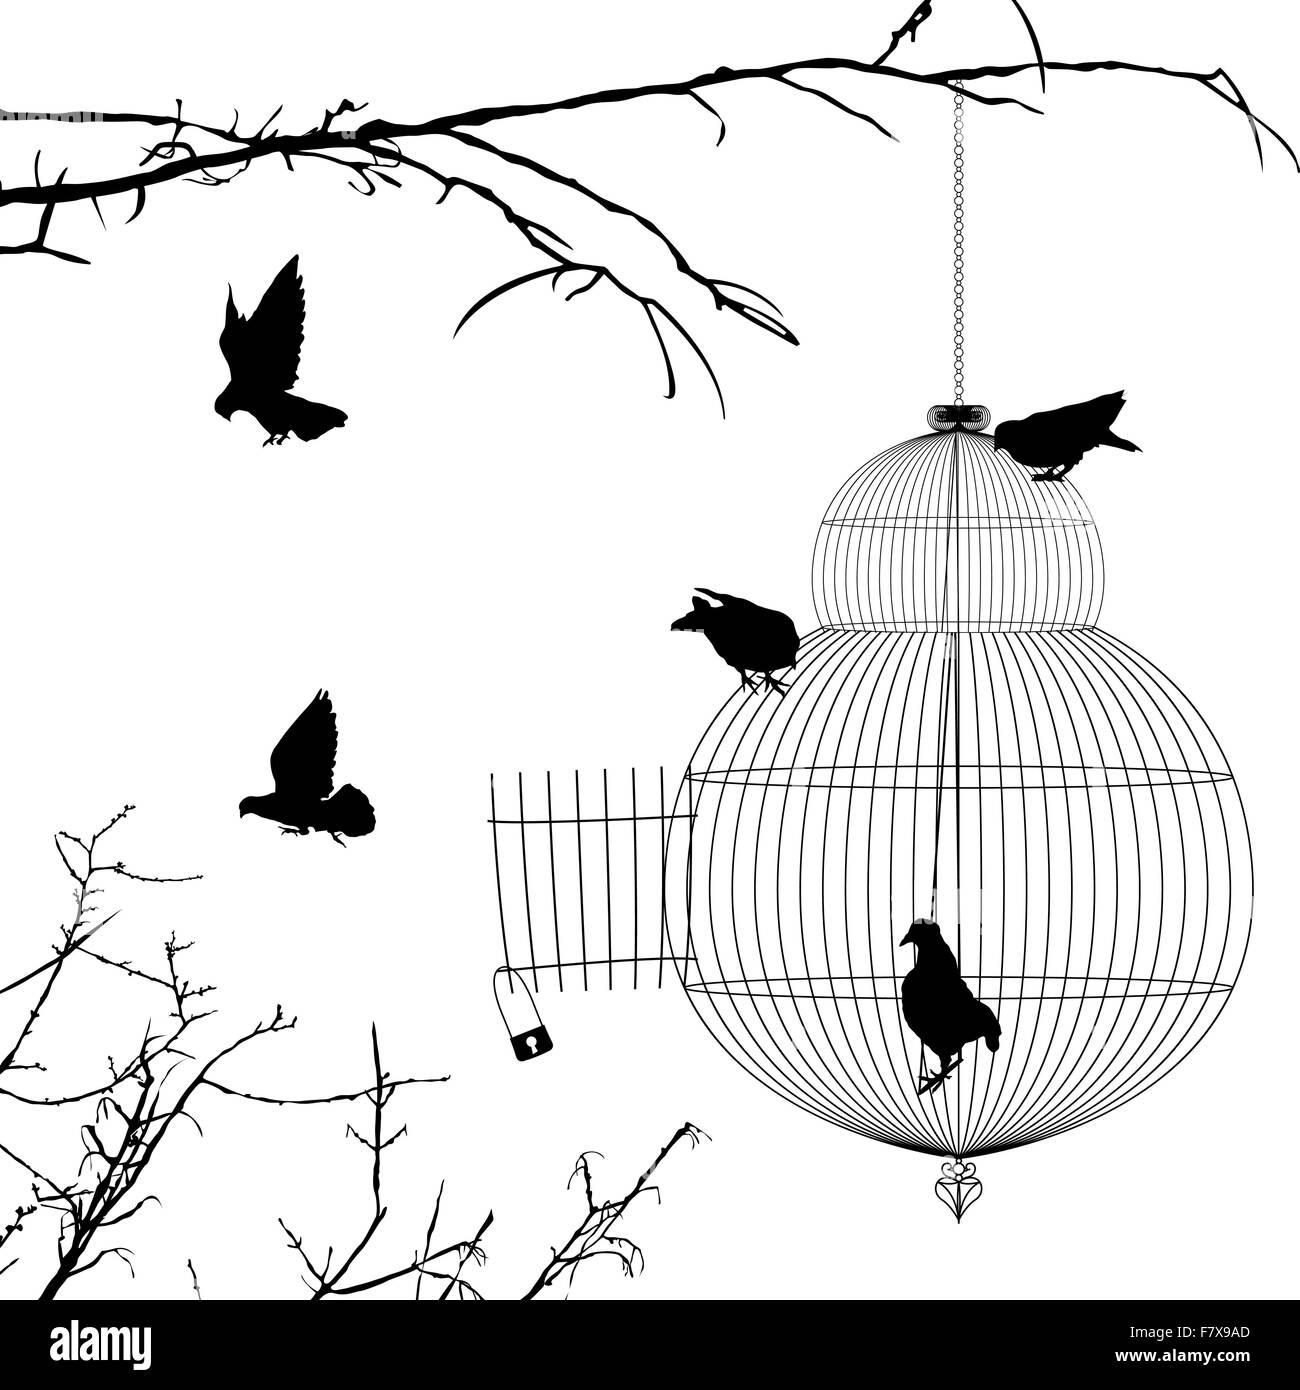 Open cage and birds silhouettes Stock Vector